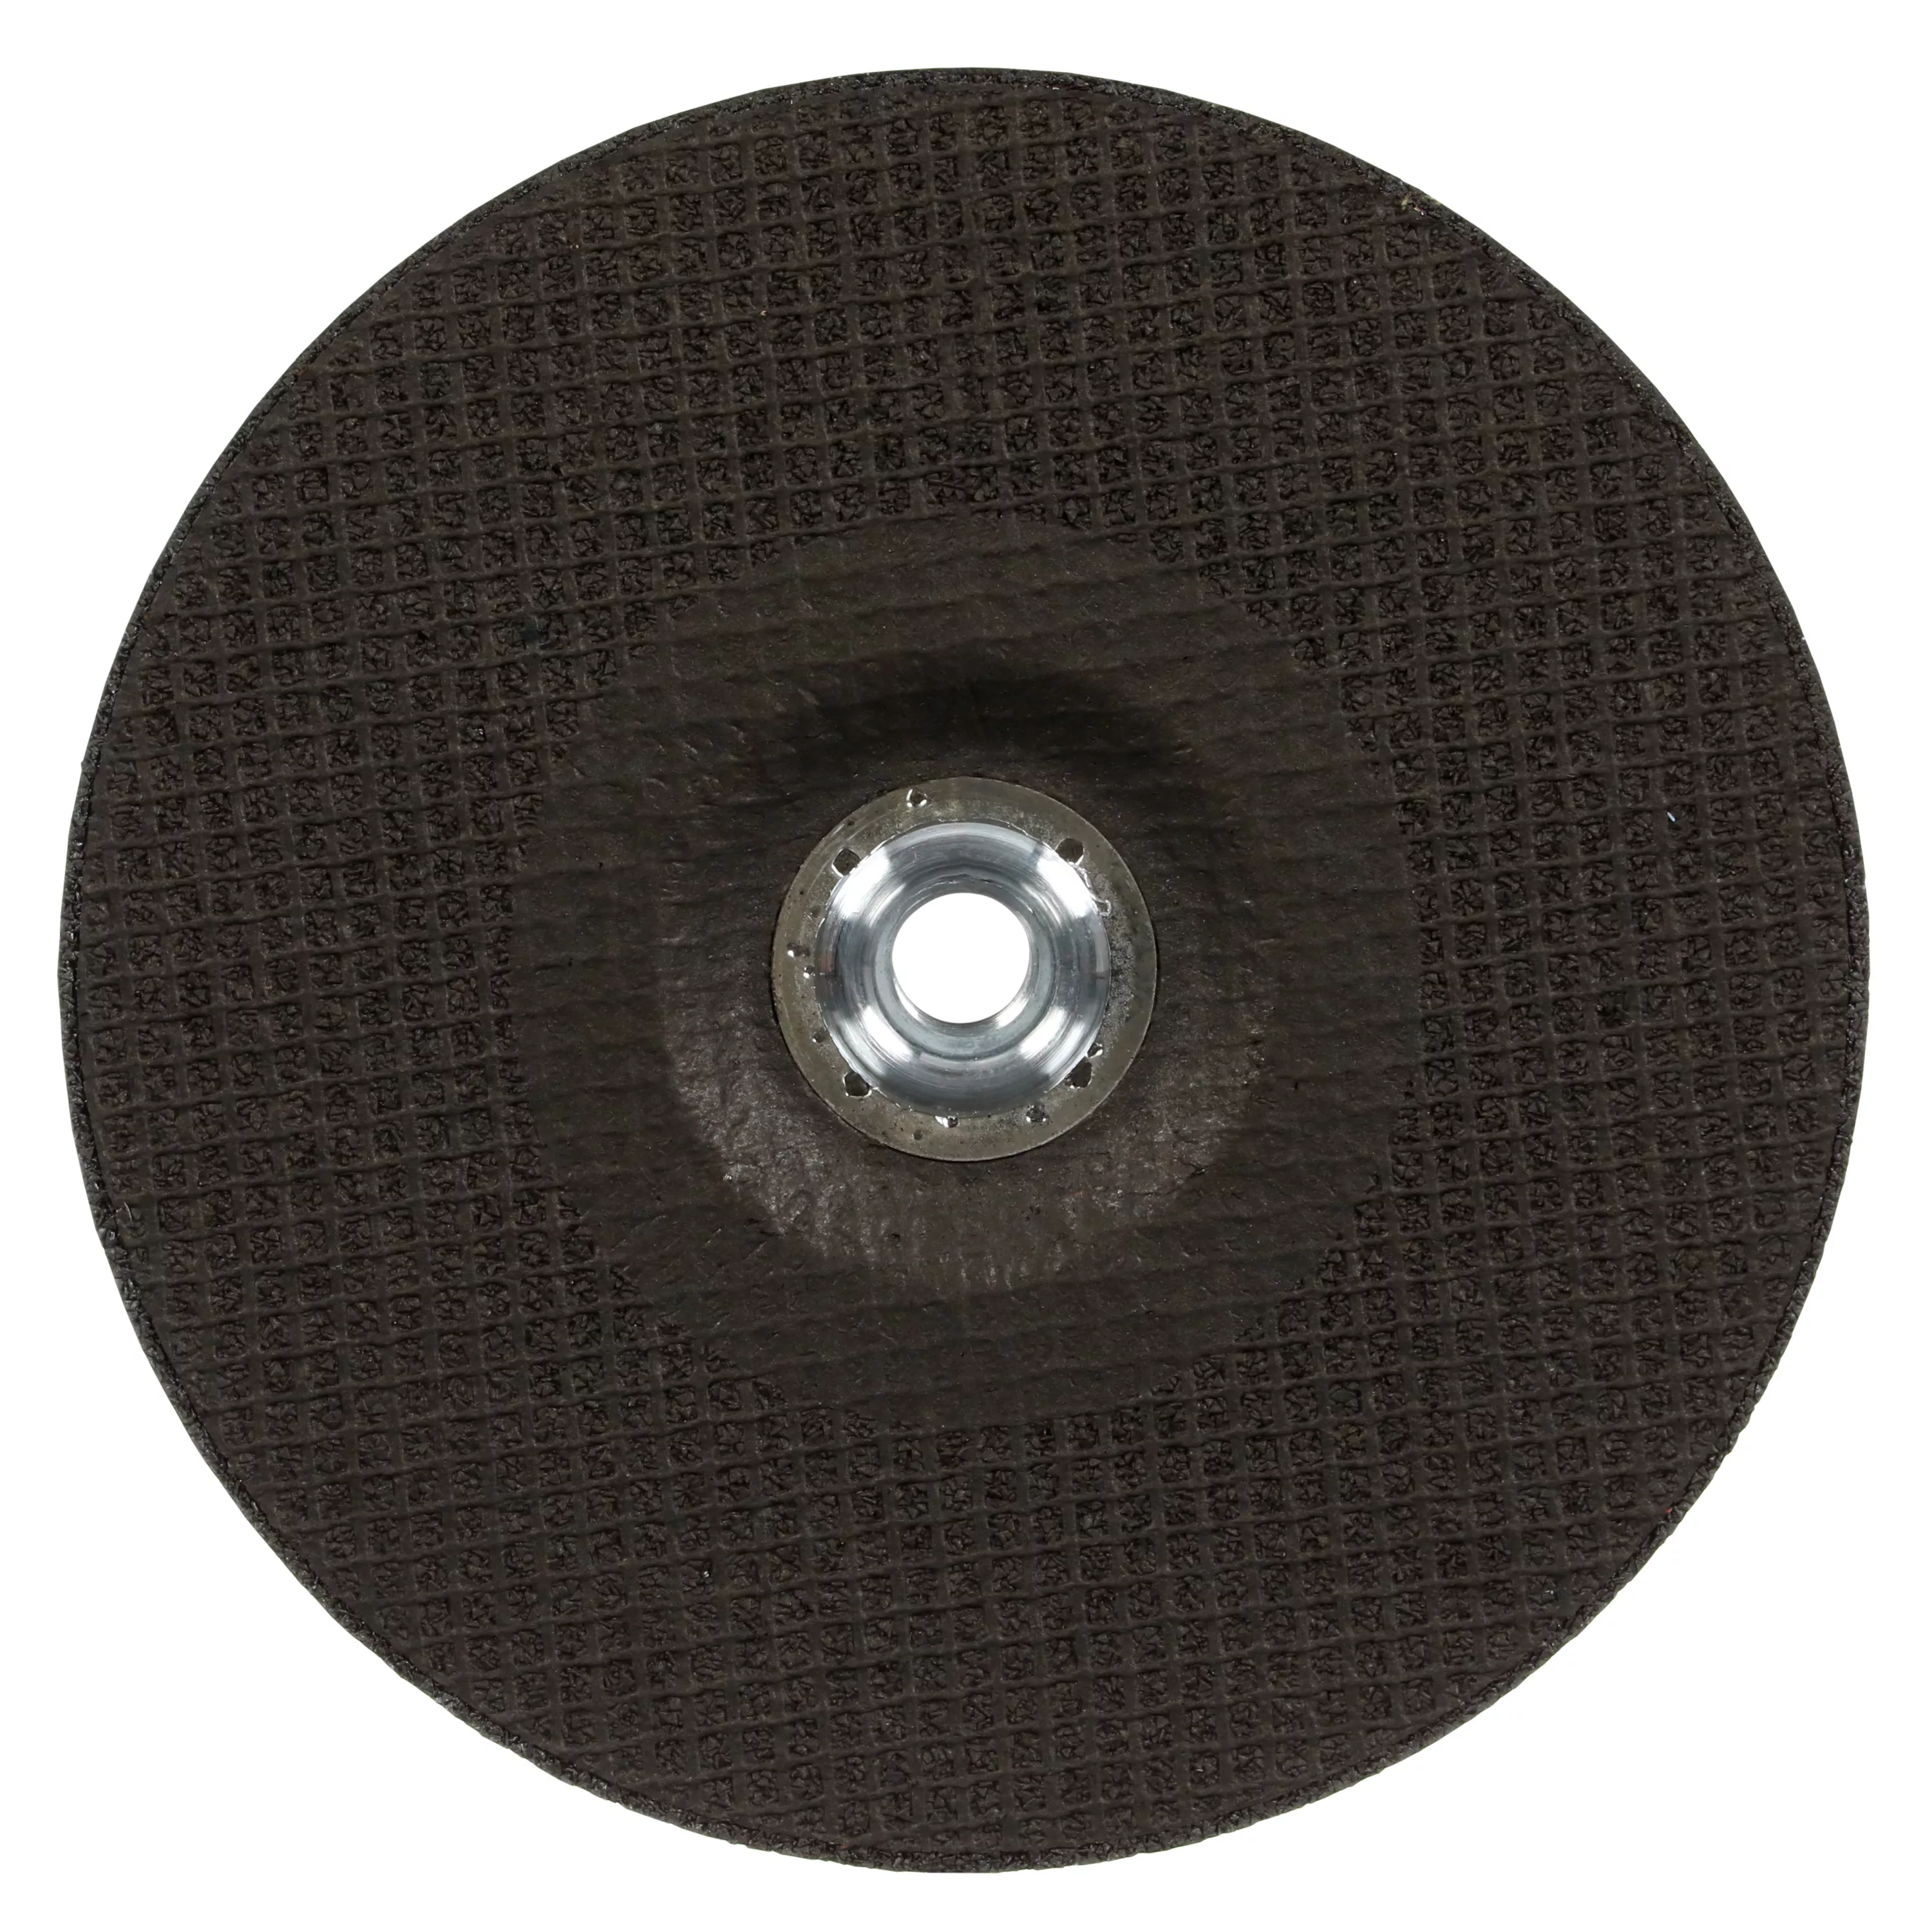 Product Number 90022 | 3M™ Cubitron™ 3 Cut and Grind Wheel